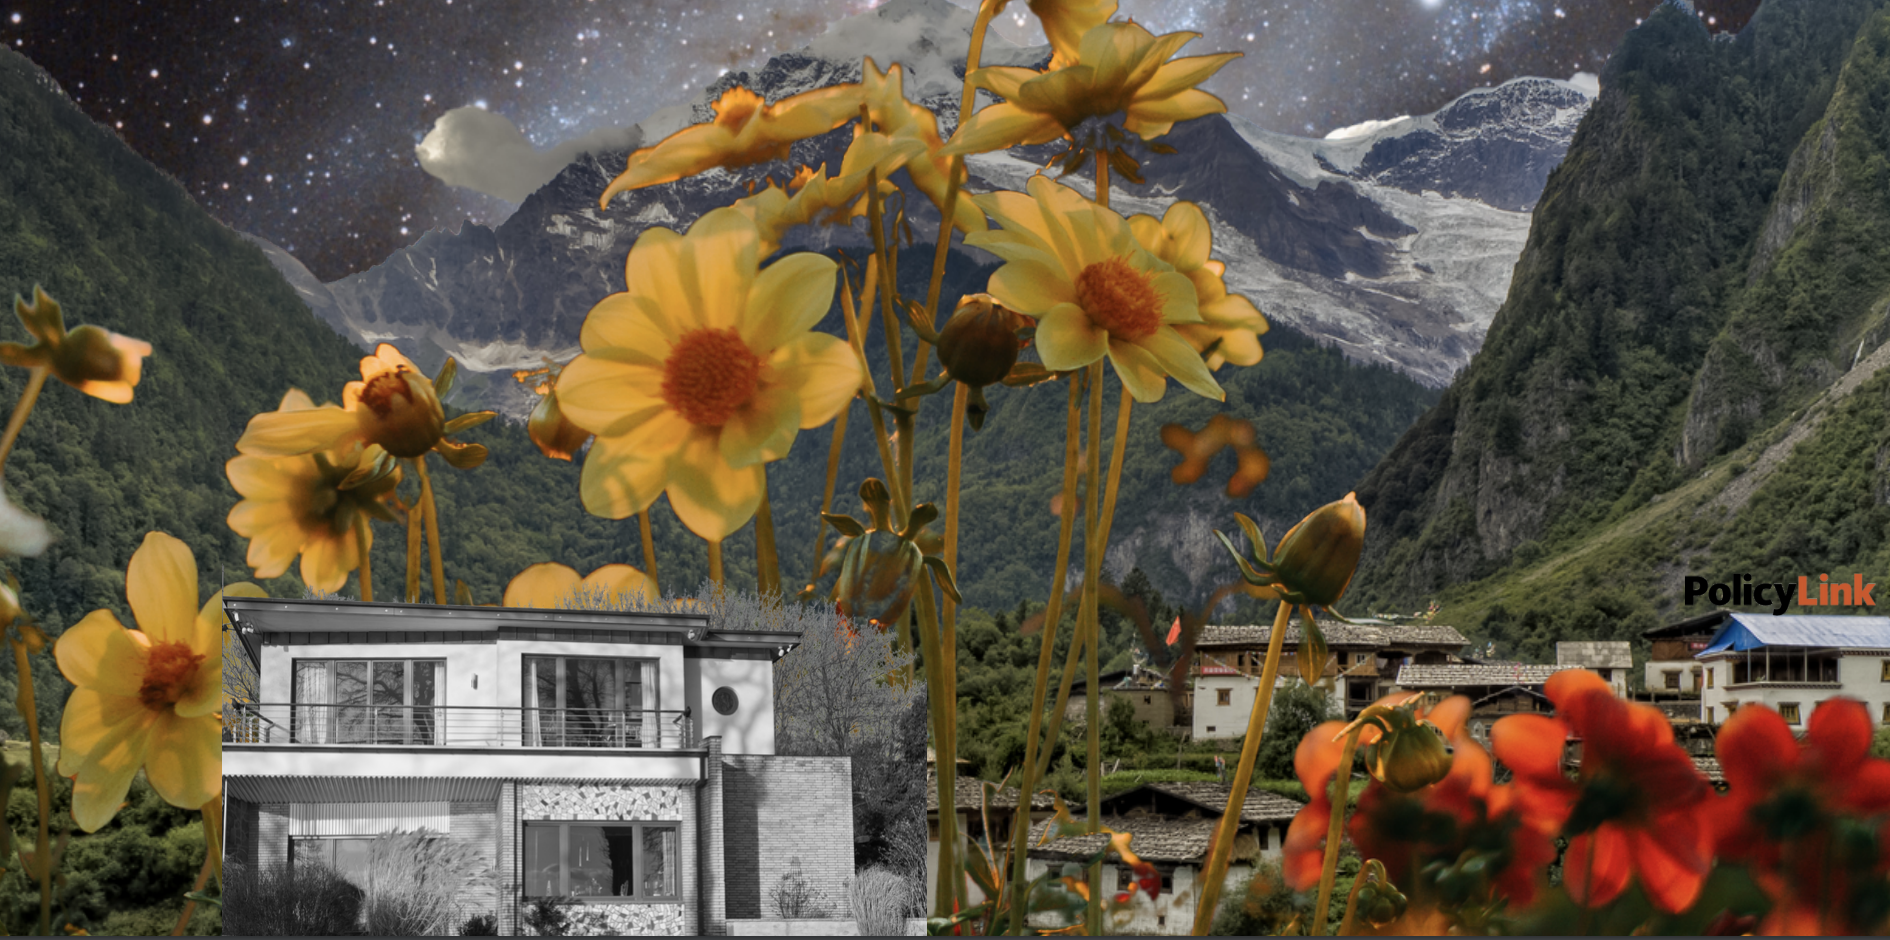 Report cover image. A house in front of sunflowers